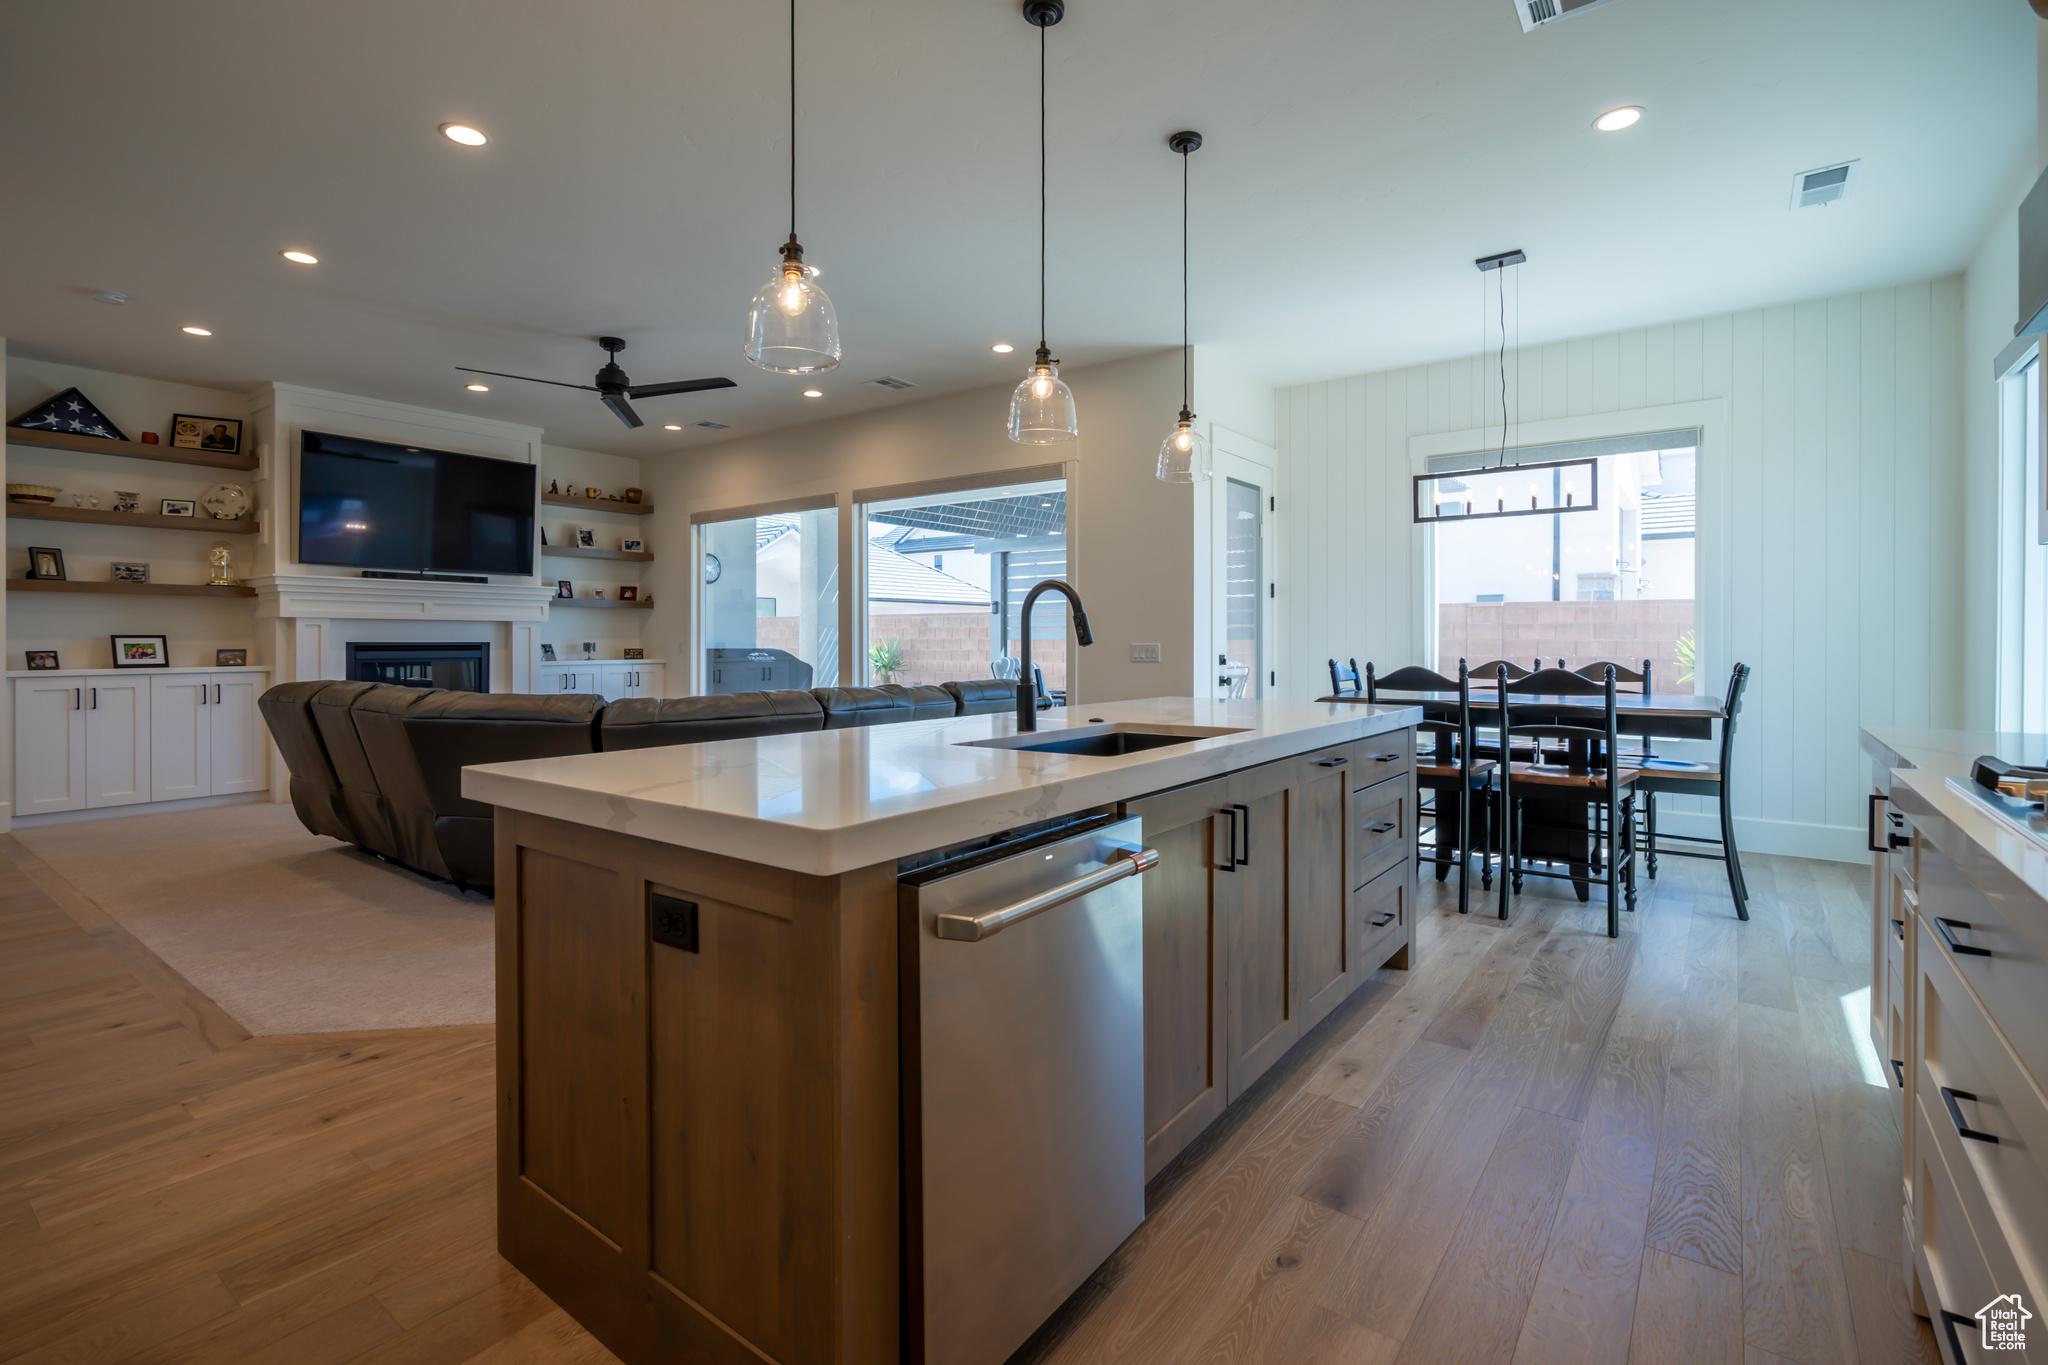 Kitchen with a large fireplace, light hardwood / wood-style flooring, sink, a center island with sink, and stainless steel dishwasher